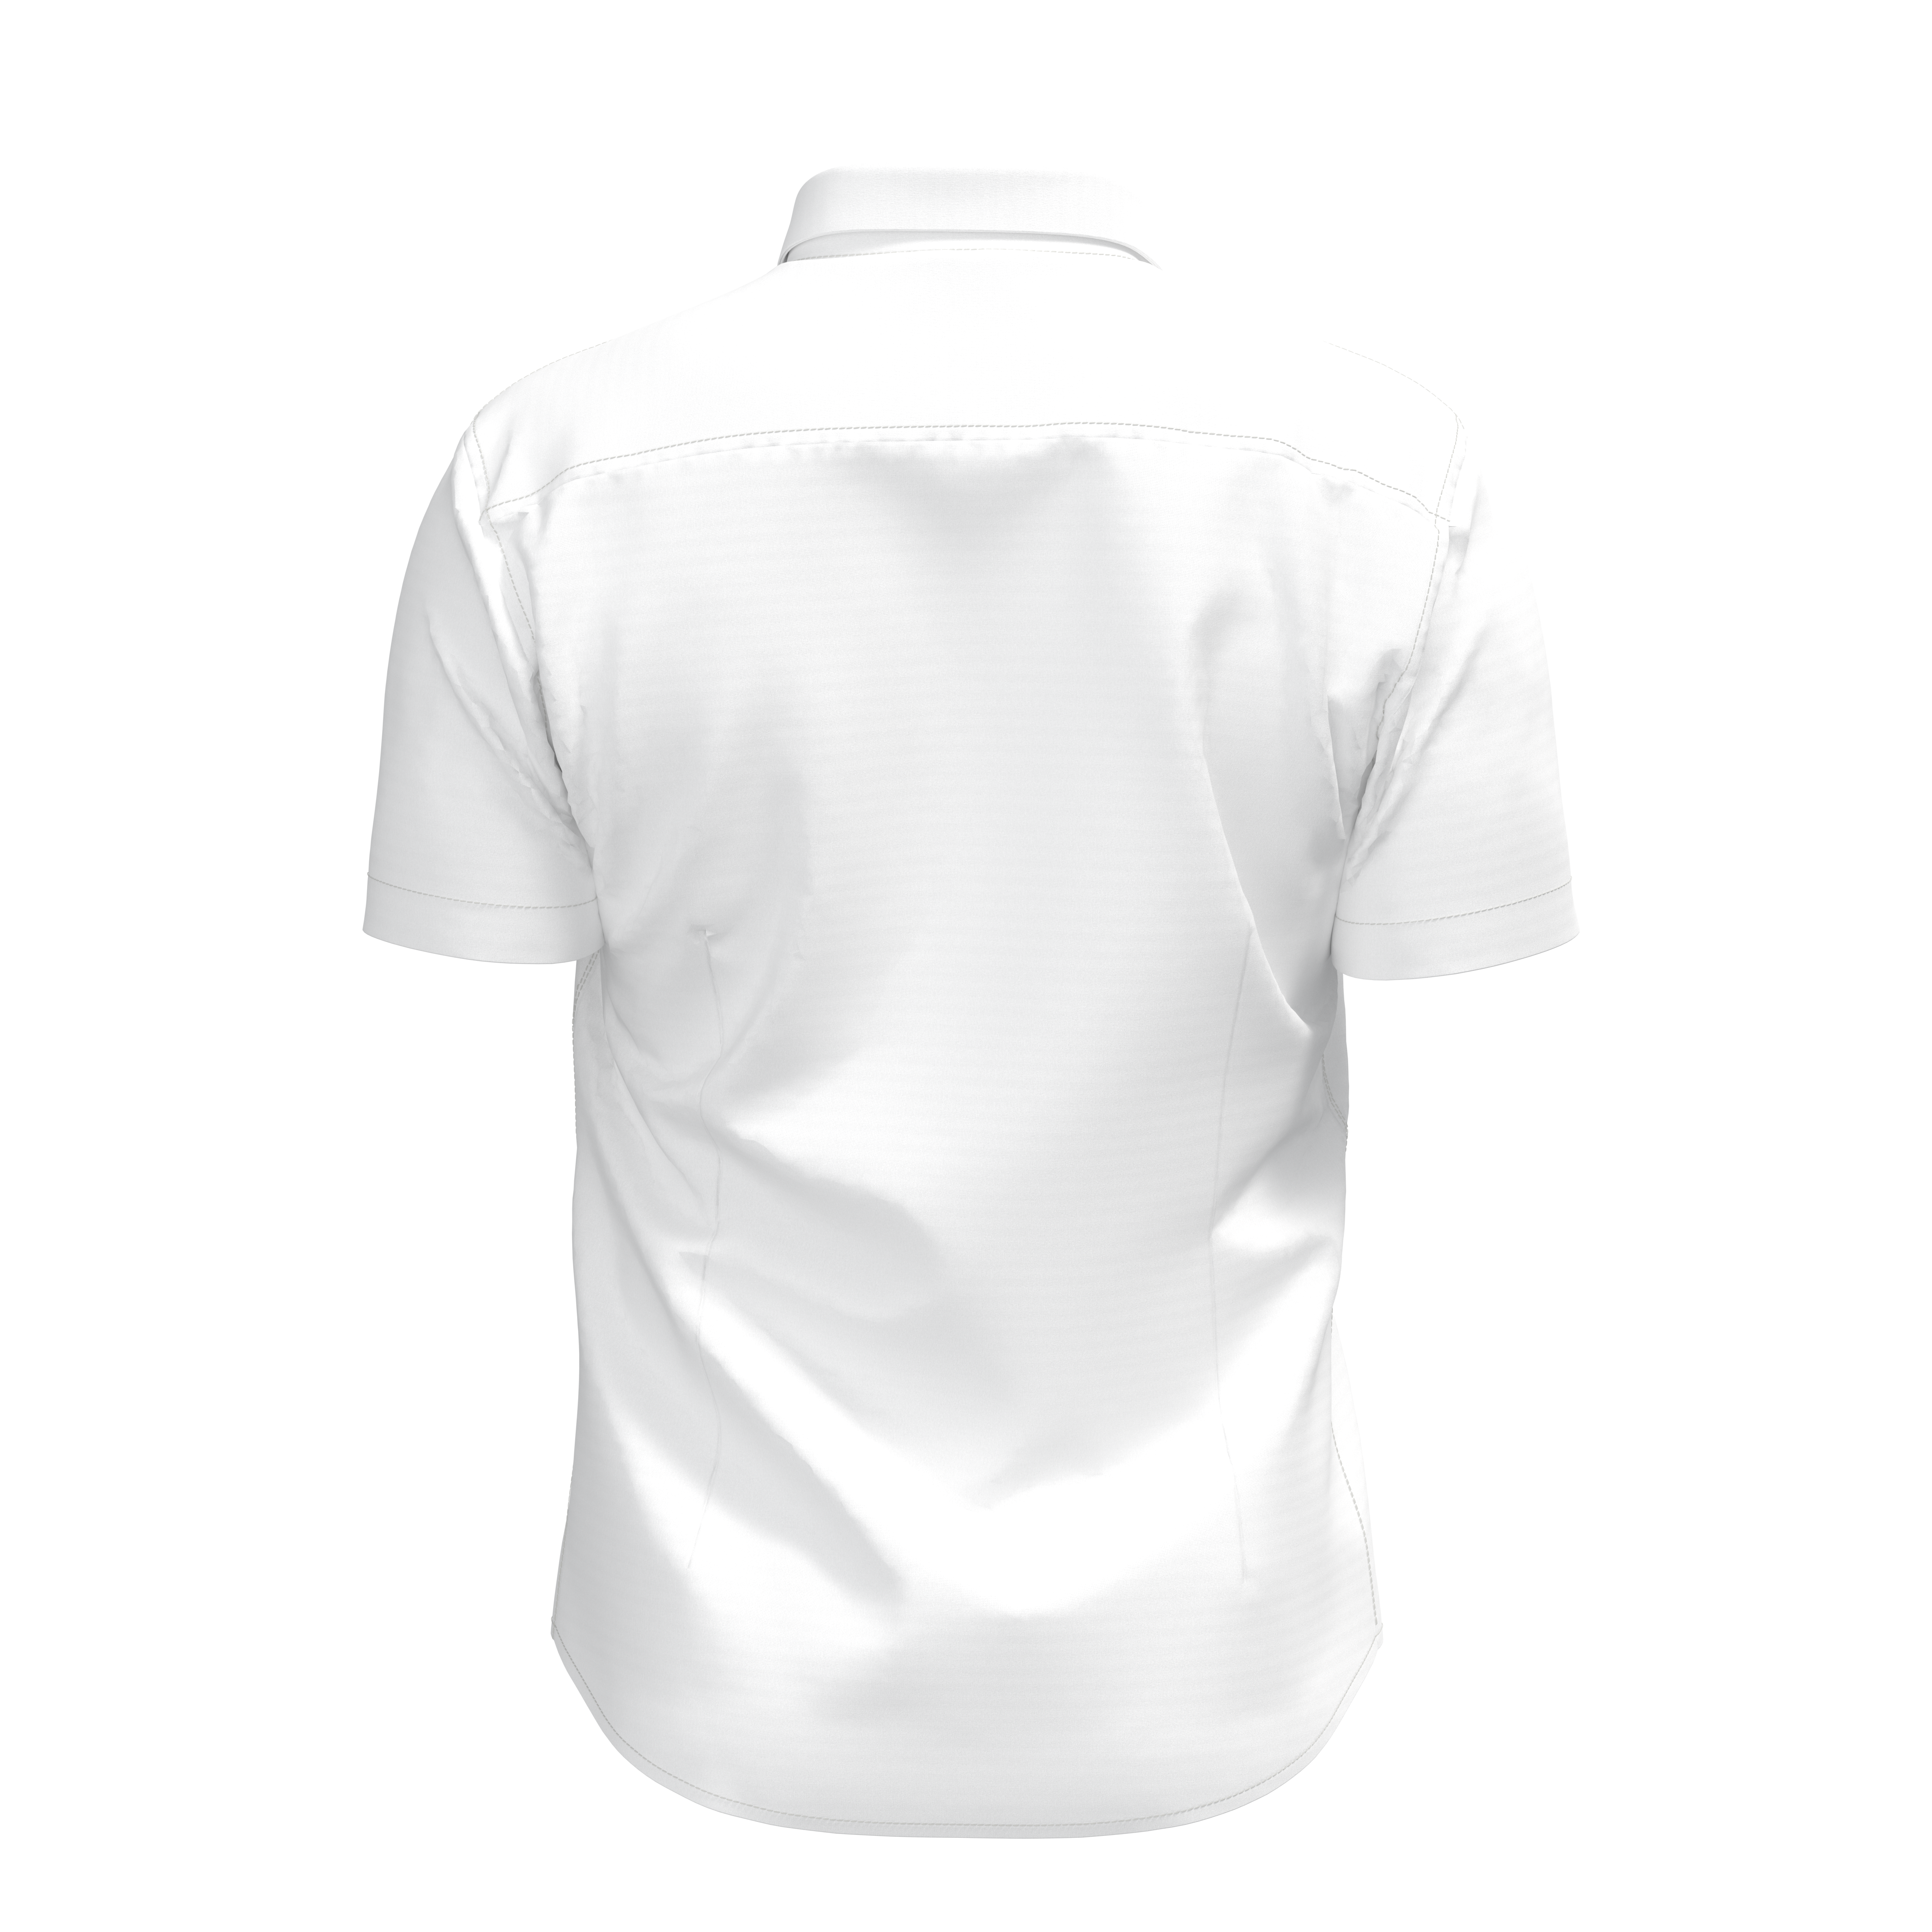 Classic Textured Cotton Oxford Short Sleeves Shirt - White